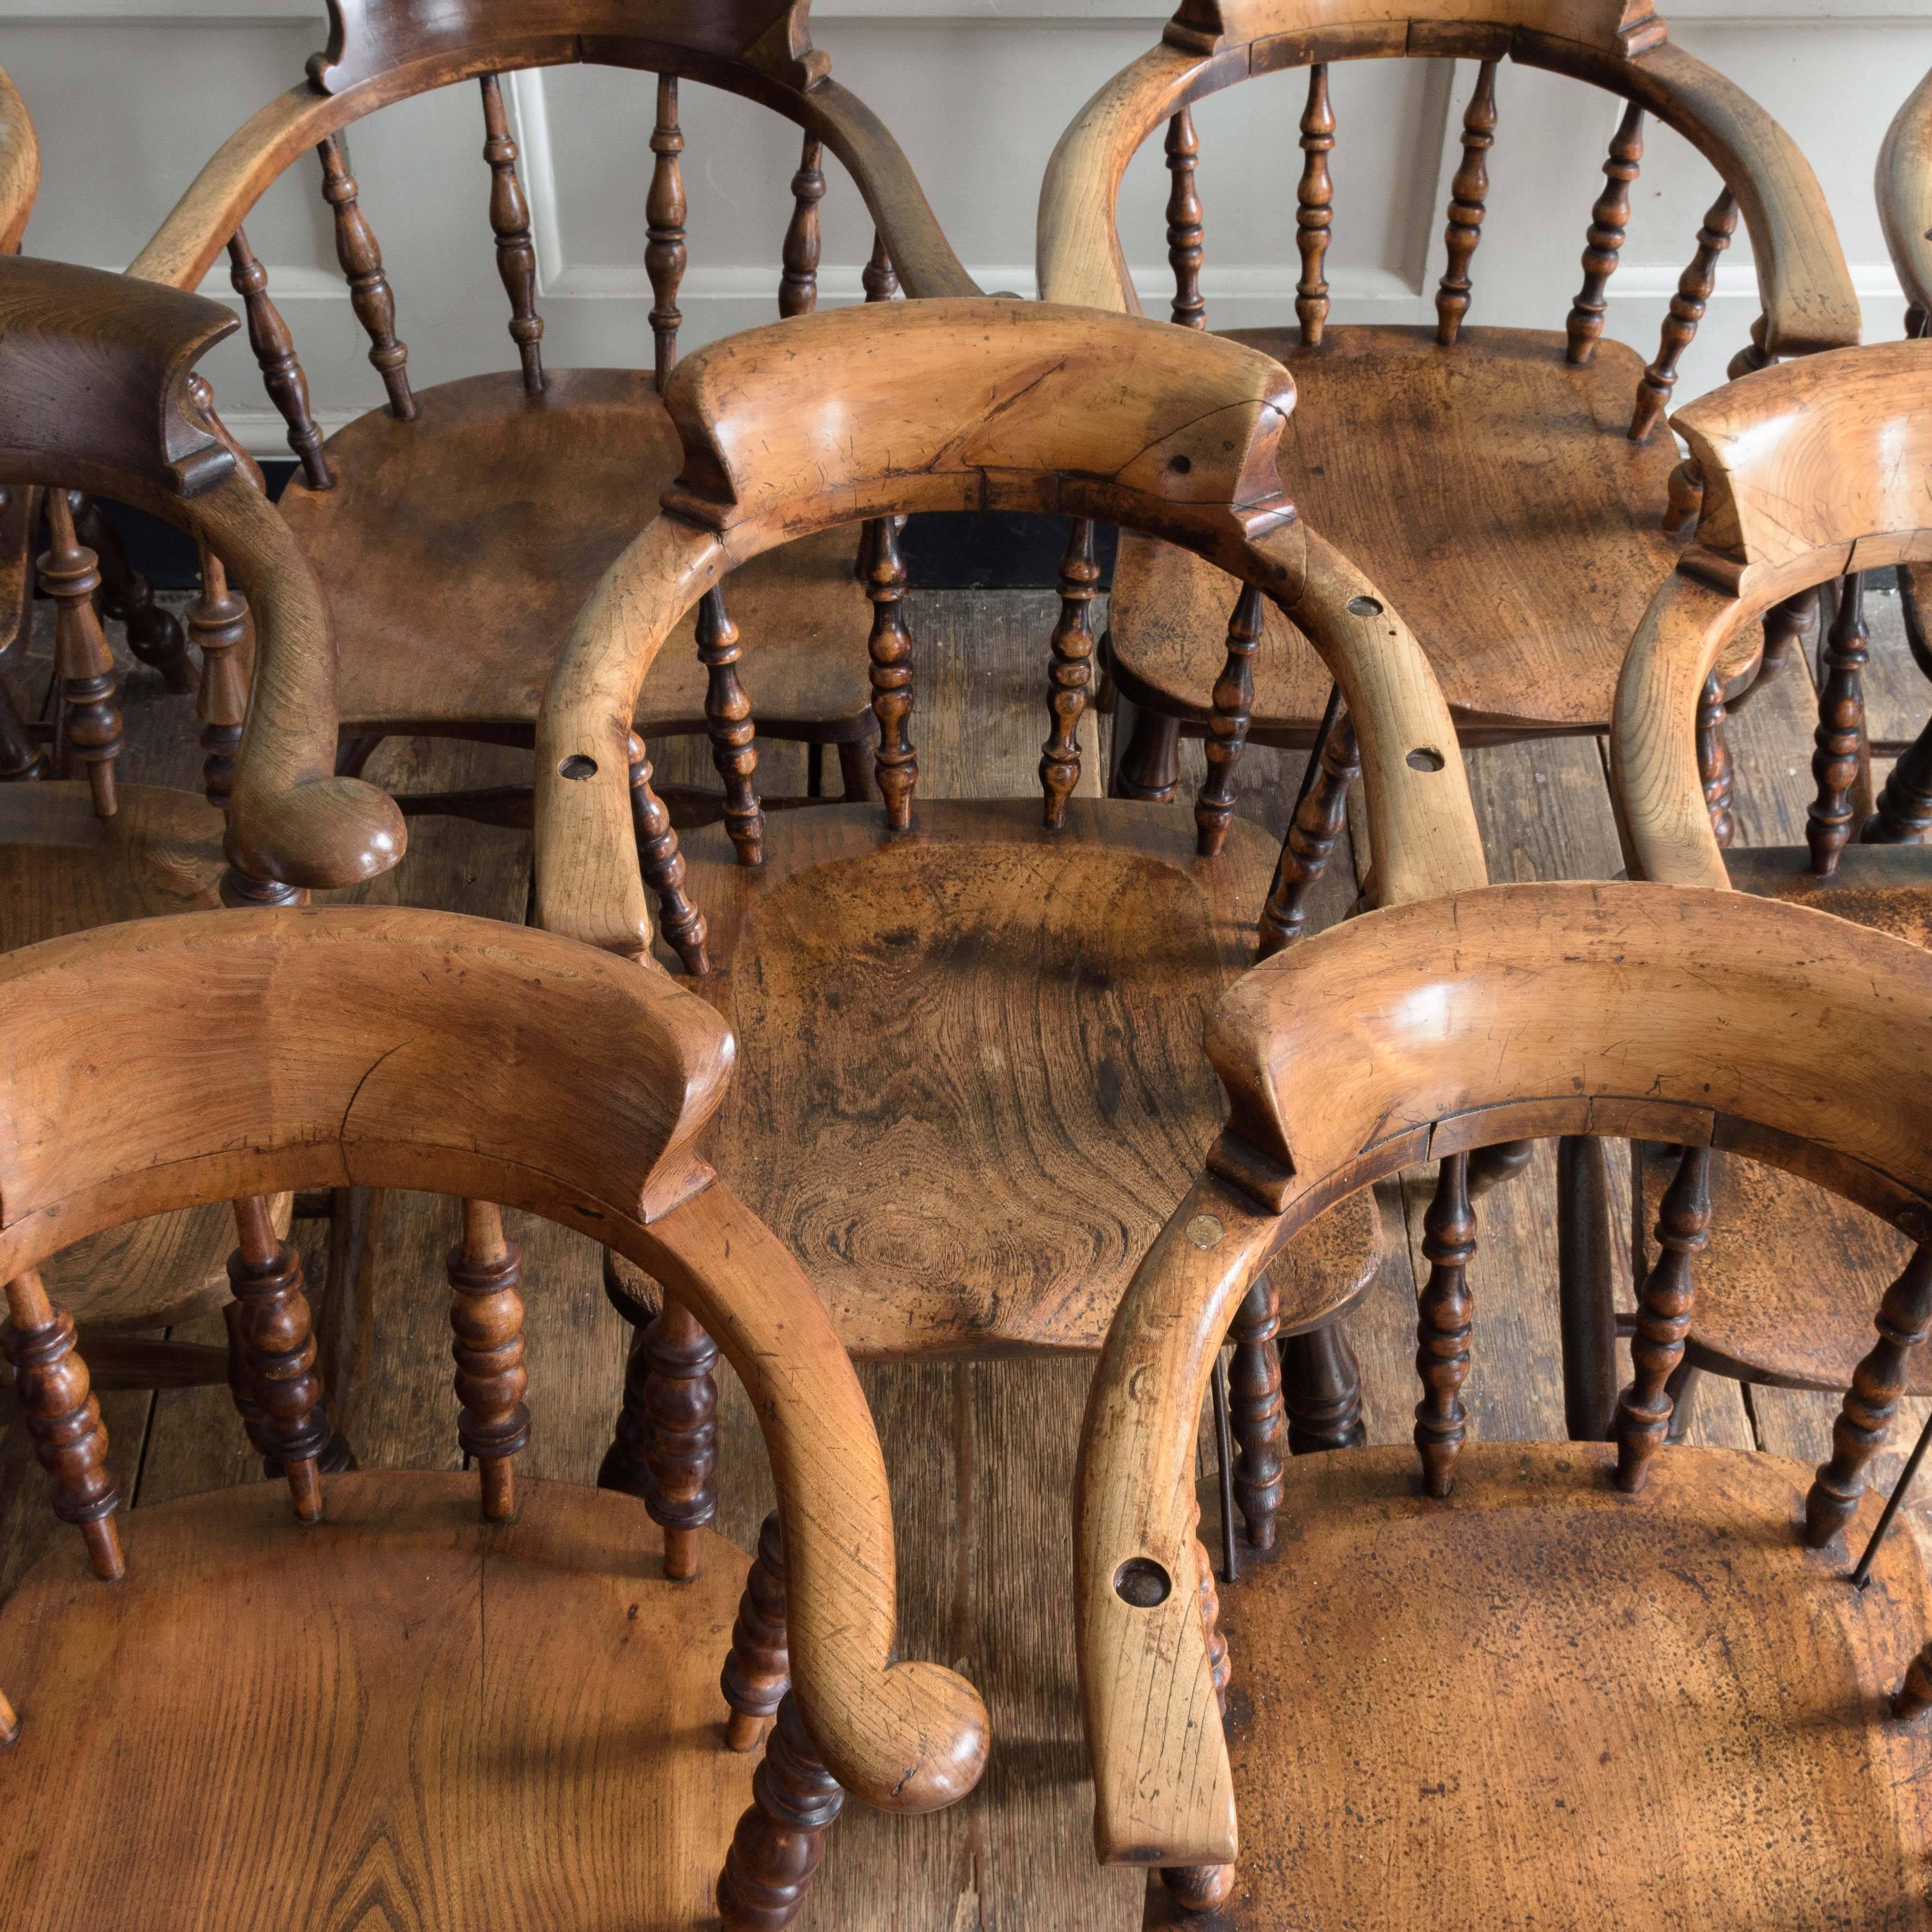 Matched set of nine stout Smoker's Bow Windsor armchairs, Yorkshire, circa 1860-1880, fruitwood, ash and elm with blacksmith's repairs.

Although commonly described as Smoker's Bow or Smoking chairs, examples such as this were commonly used as